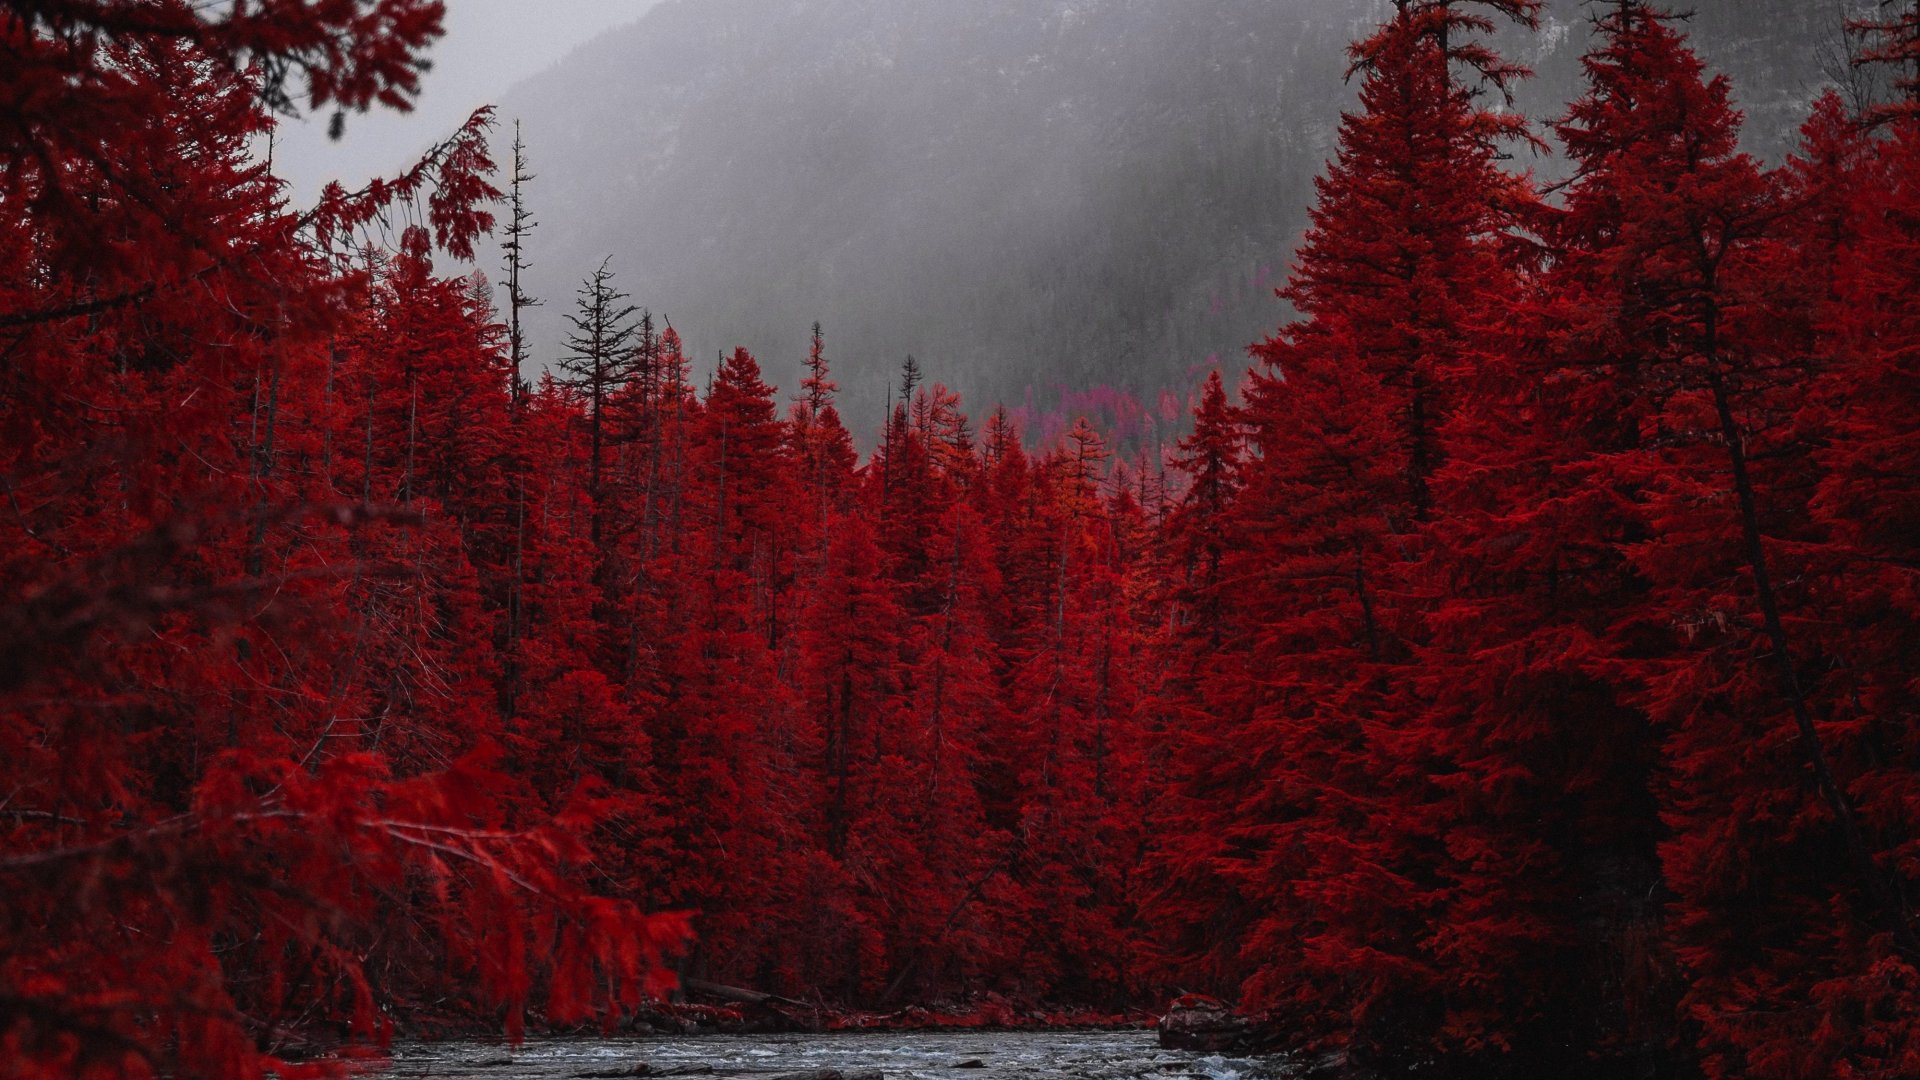 Download wallpaper 1920x1080 red forest, tree, stream, nature, full hd,  hdtv, fhd, 1080p wallpaper, 1920x1080 hd background, 23340